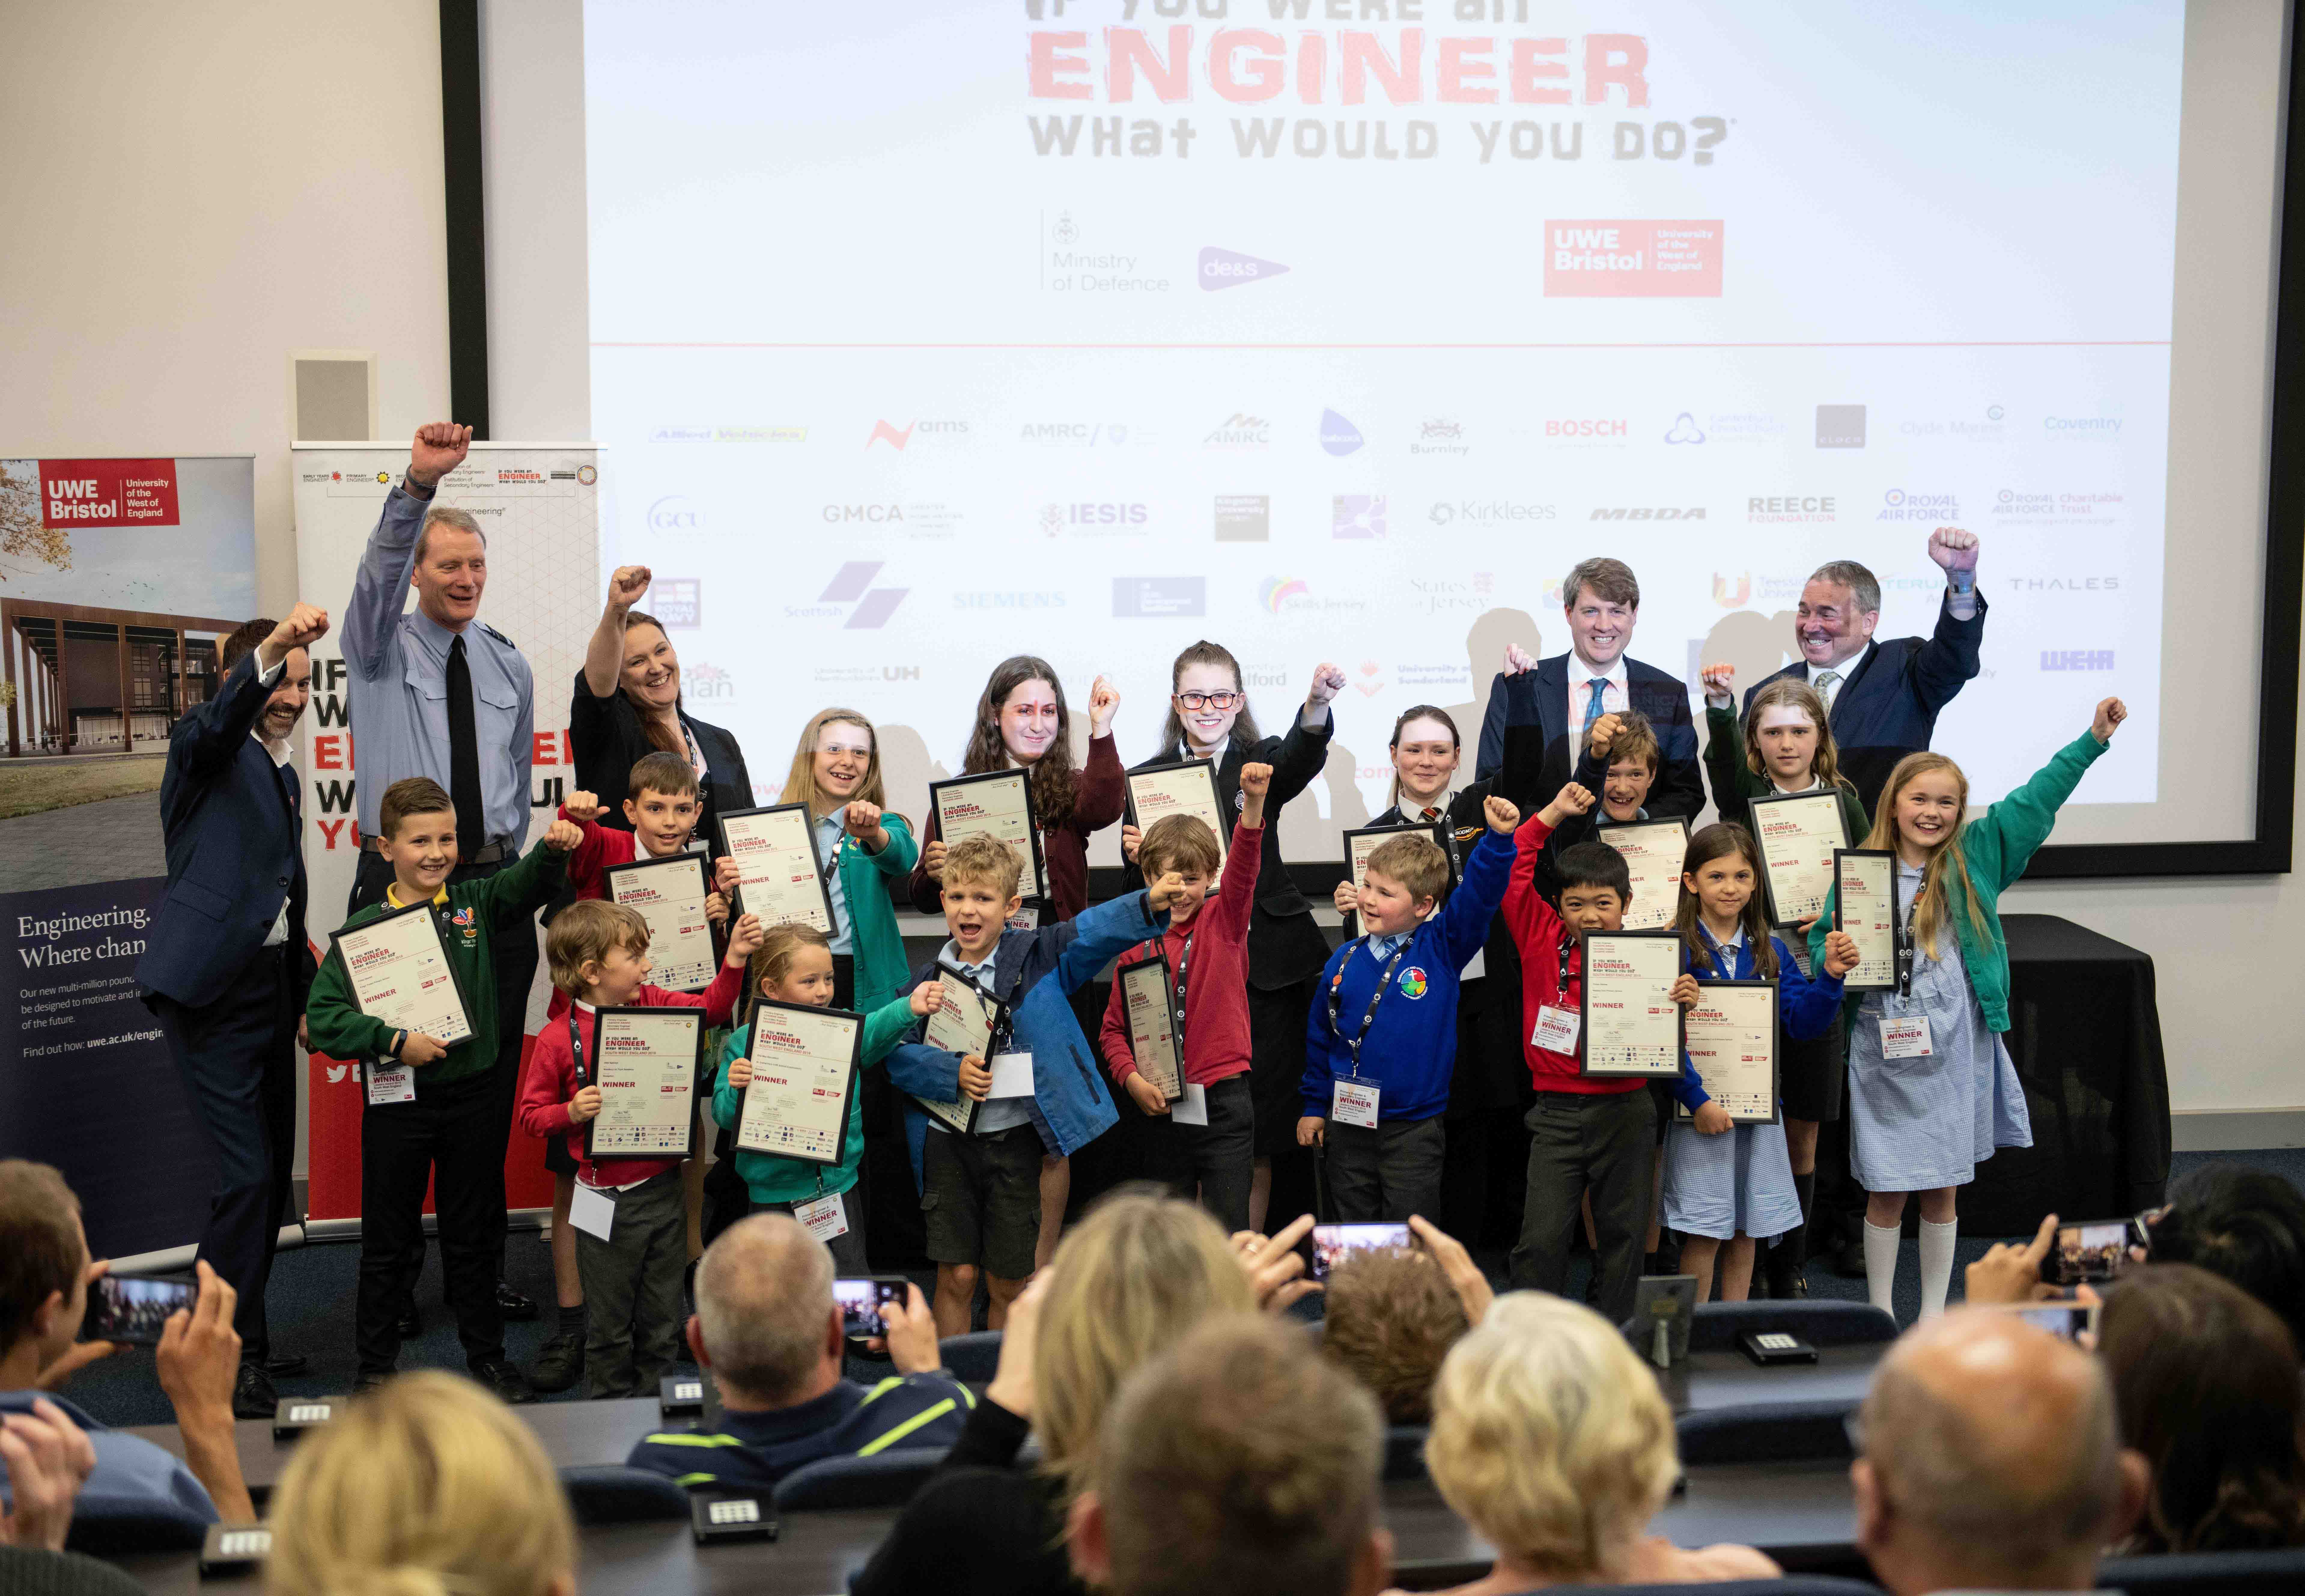 School children celebrating as a group, having received their awards for winning an engineering design competition